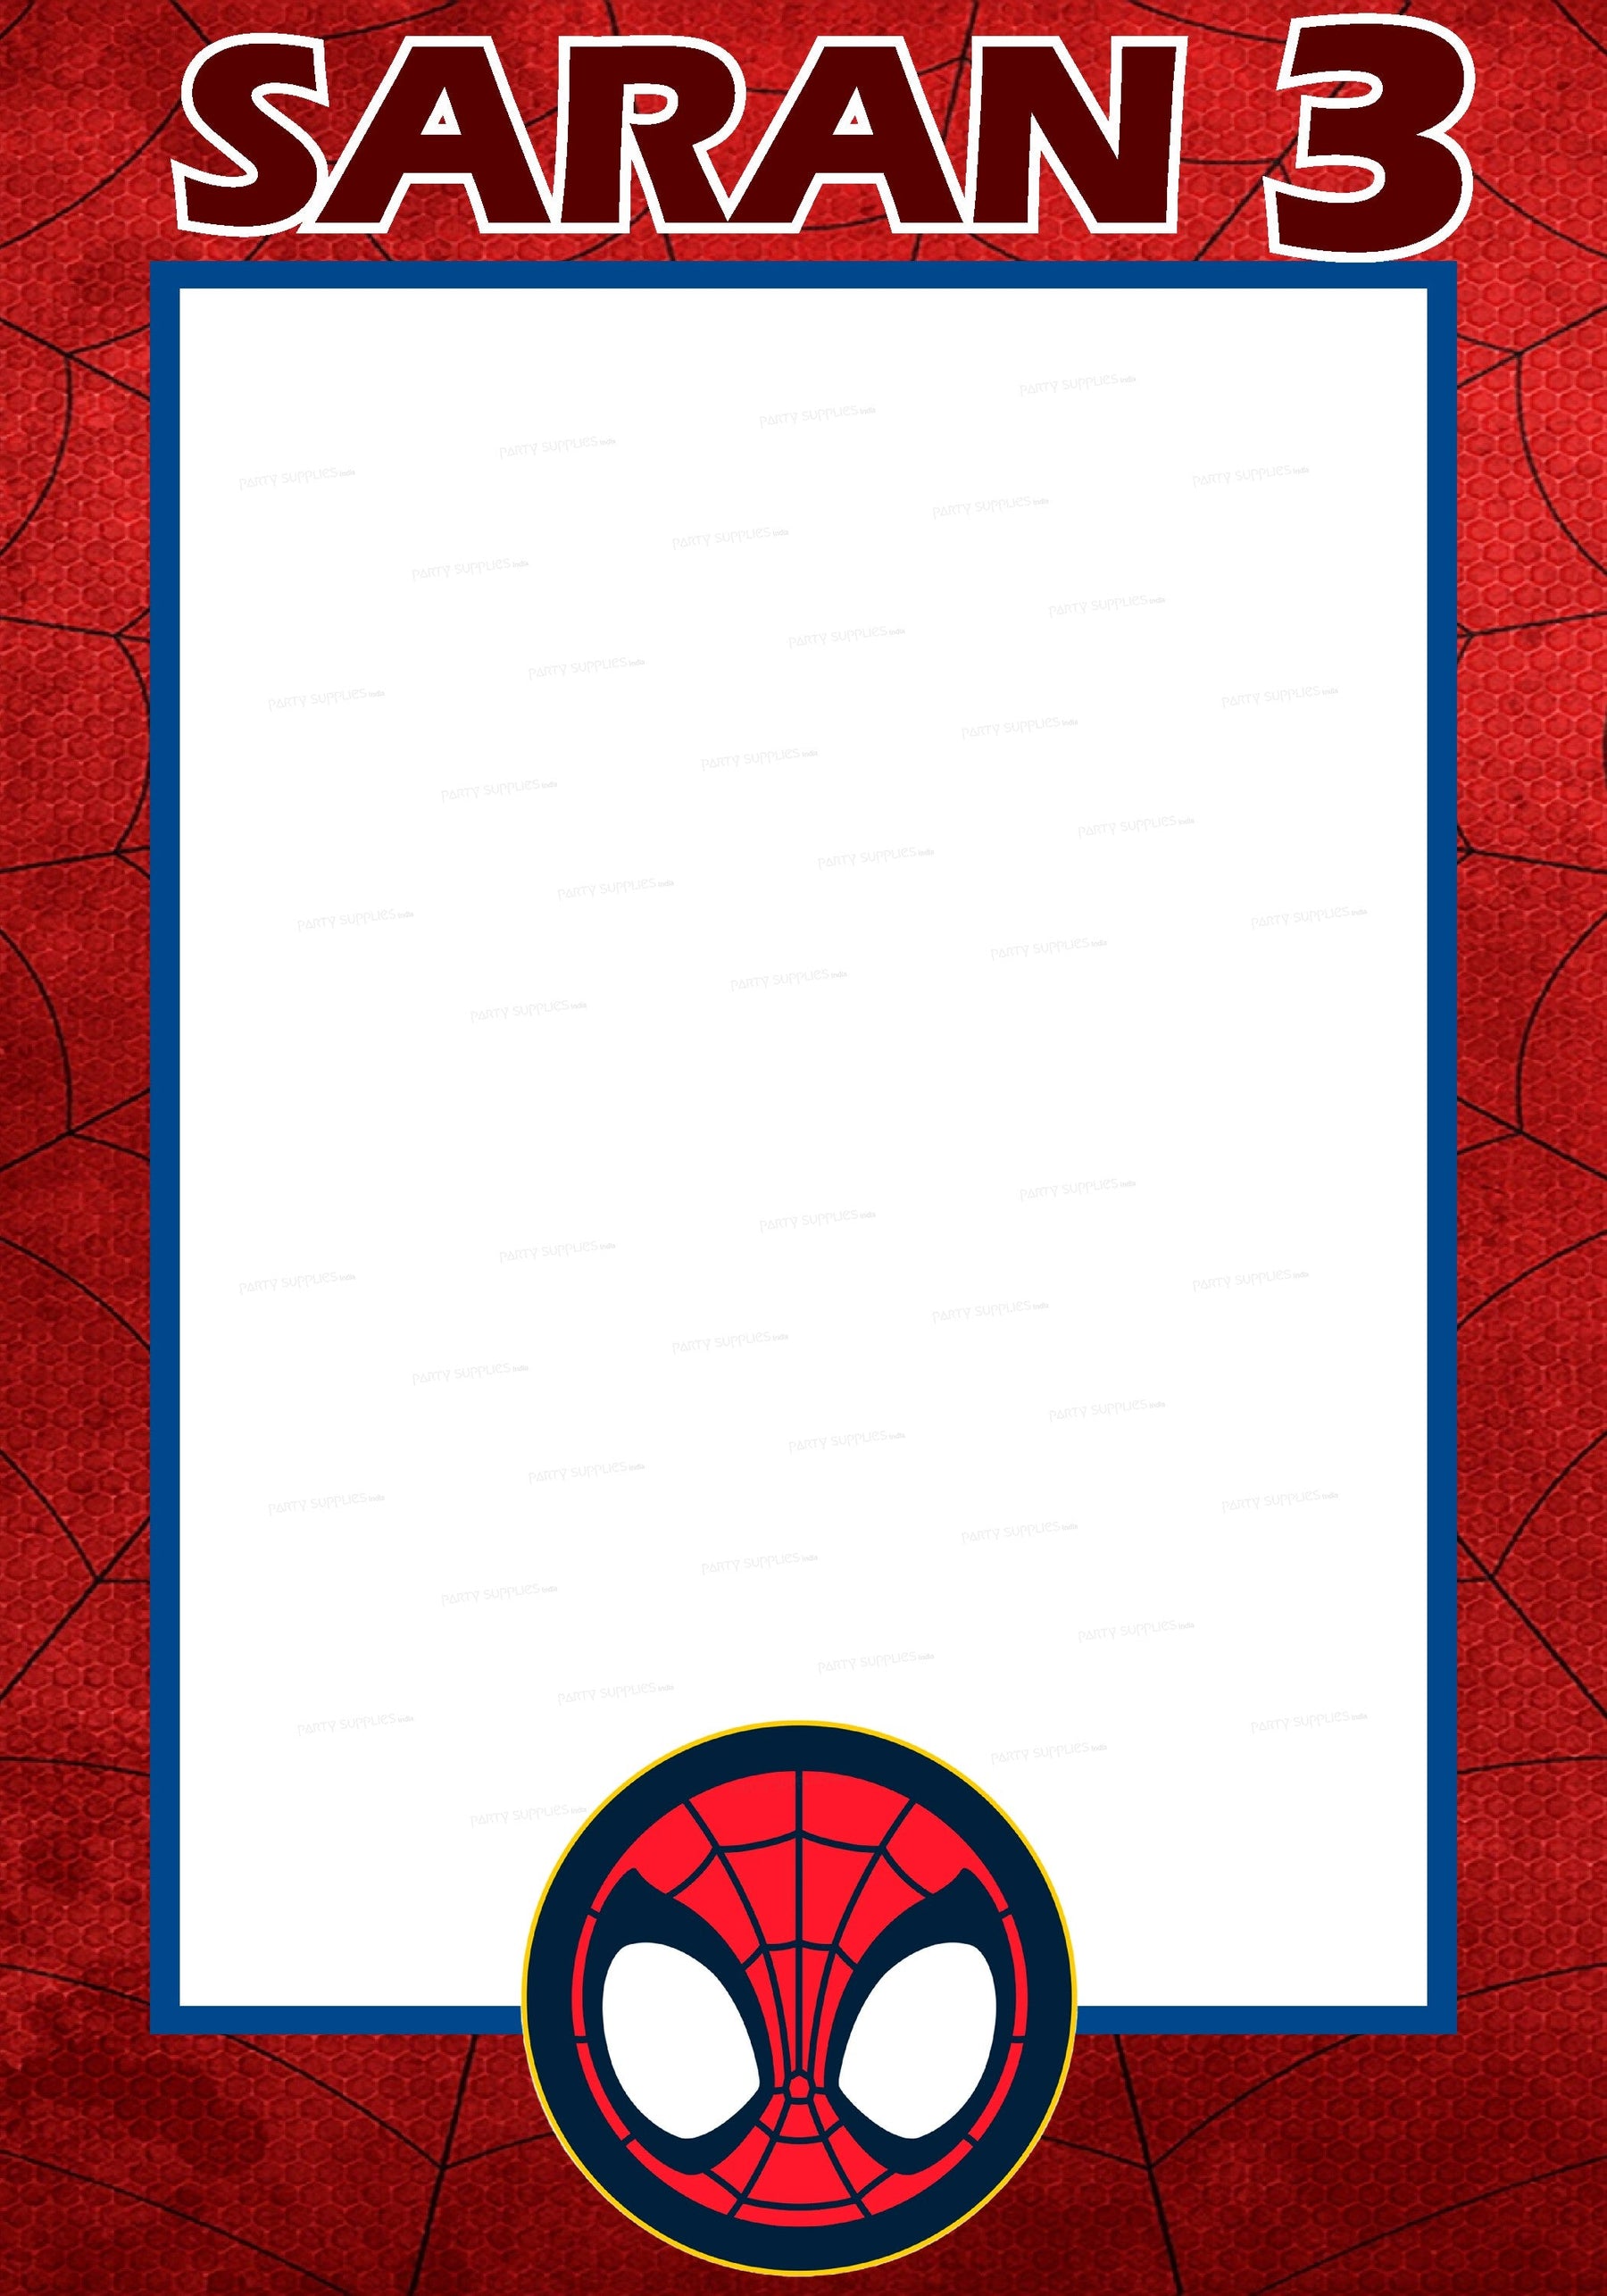 PSI Spidey and his Amazing Friends Theme Customized PhotoBooth